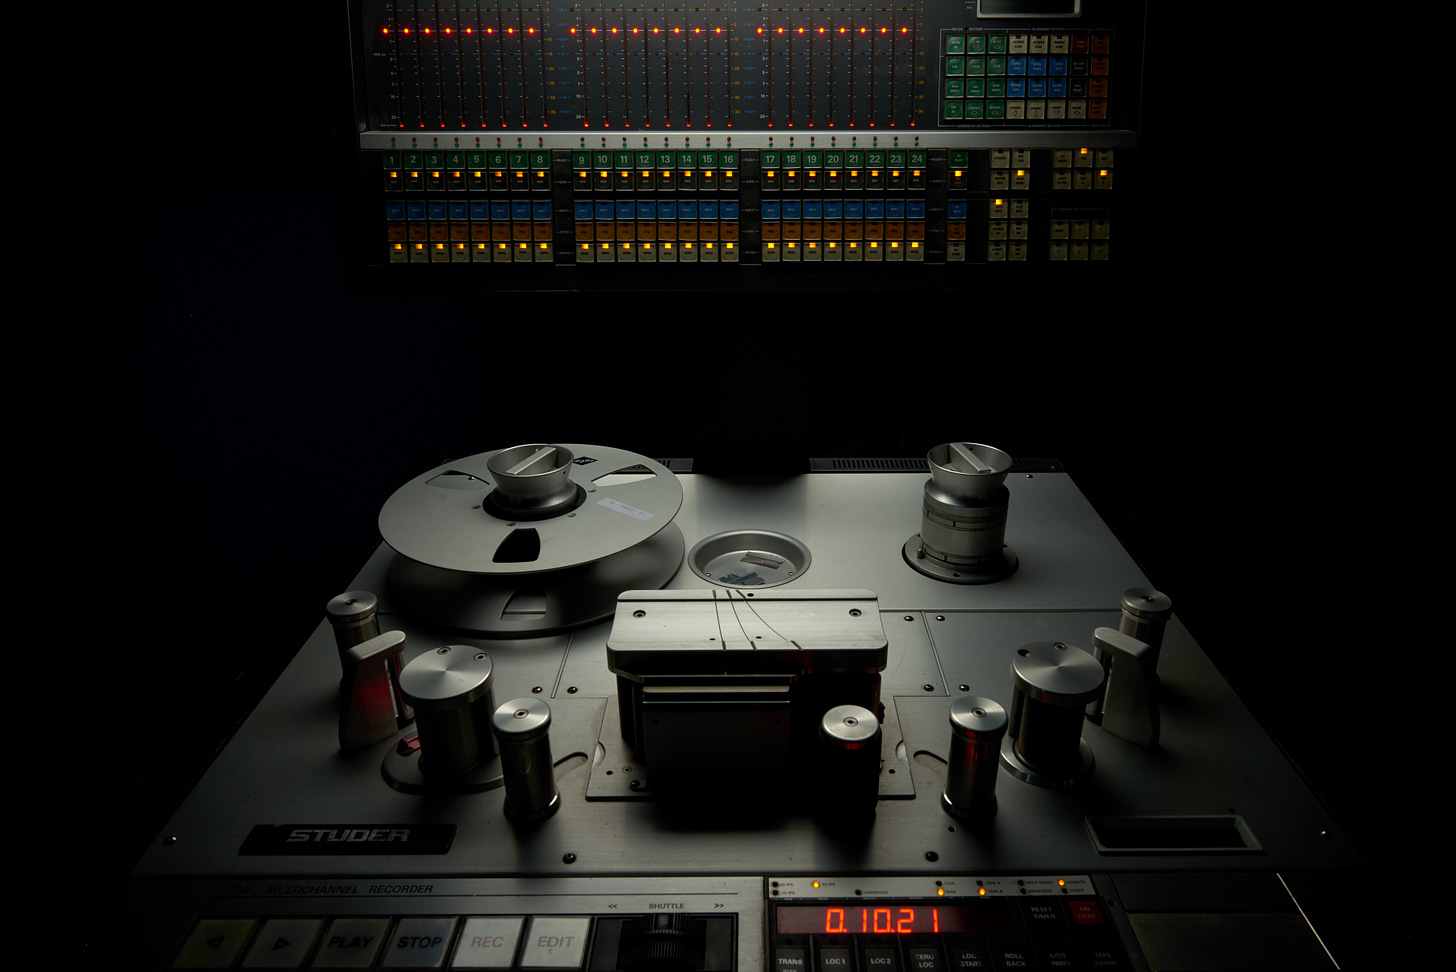 A Studer A820 24-track tape machine at Abbey Road, London